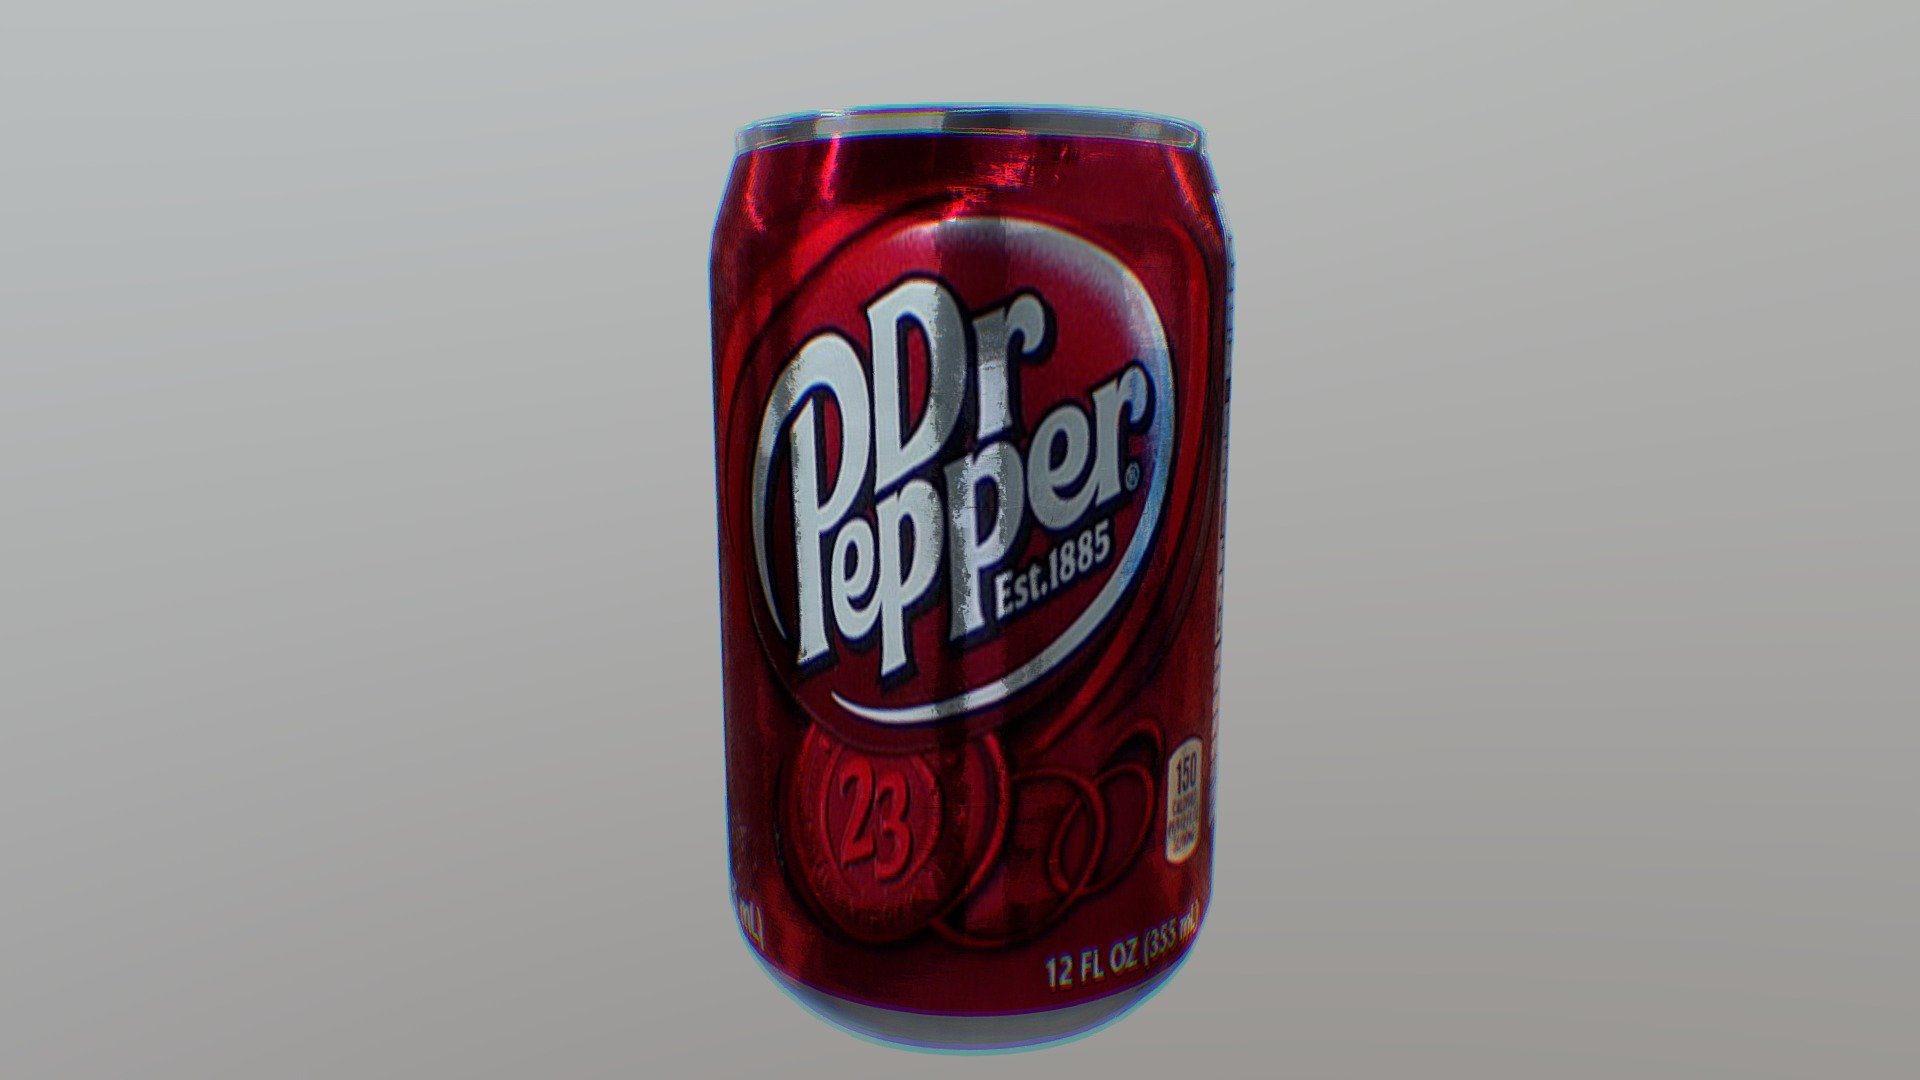 Dr Pepper is a carbonated soft drink. It was created in the 1880s by pharmacist Charles Alderton in Waco, Texas, and first served around 1885. Dr Pepper was first nationally marketed in the United States in 1904. It is now also sold in Europe, Asia, North and South America 3d model